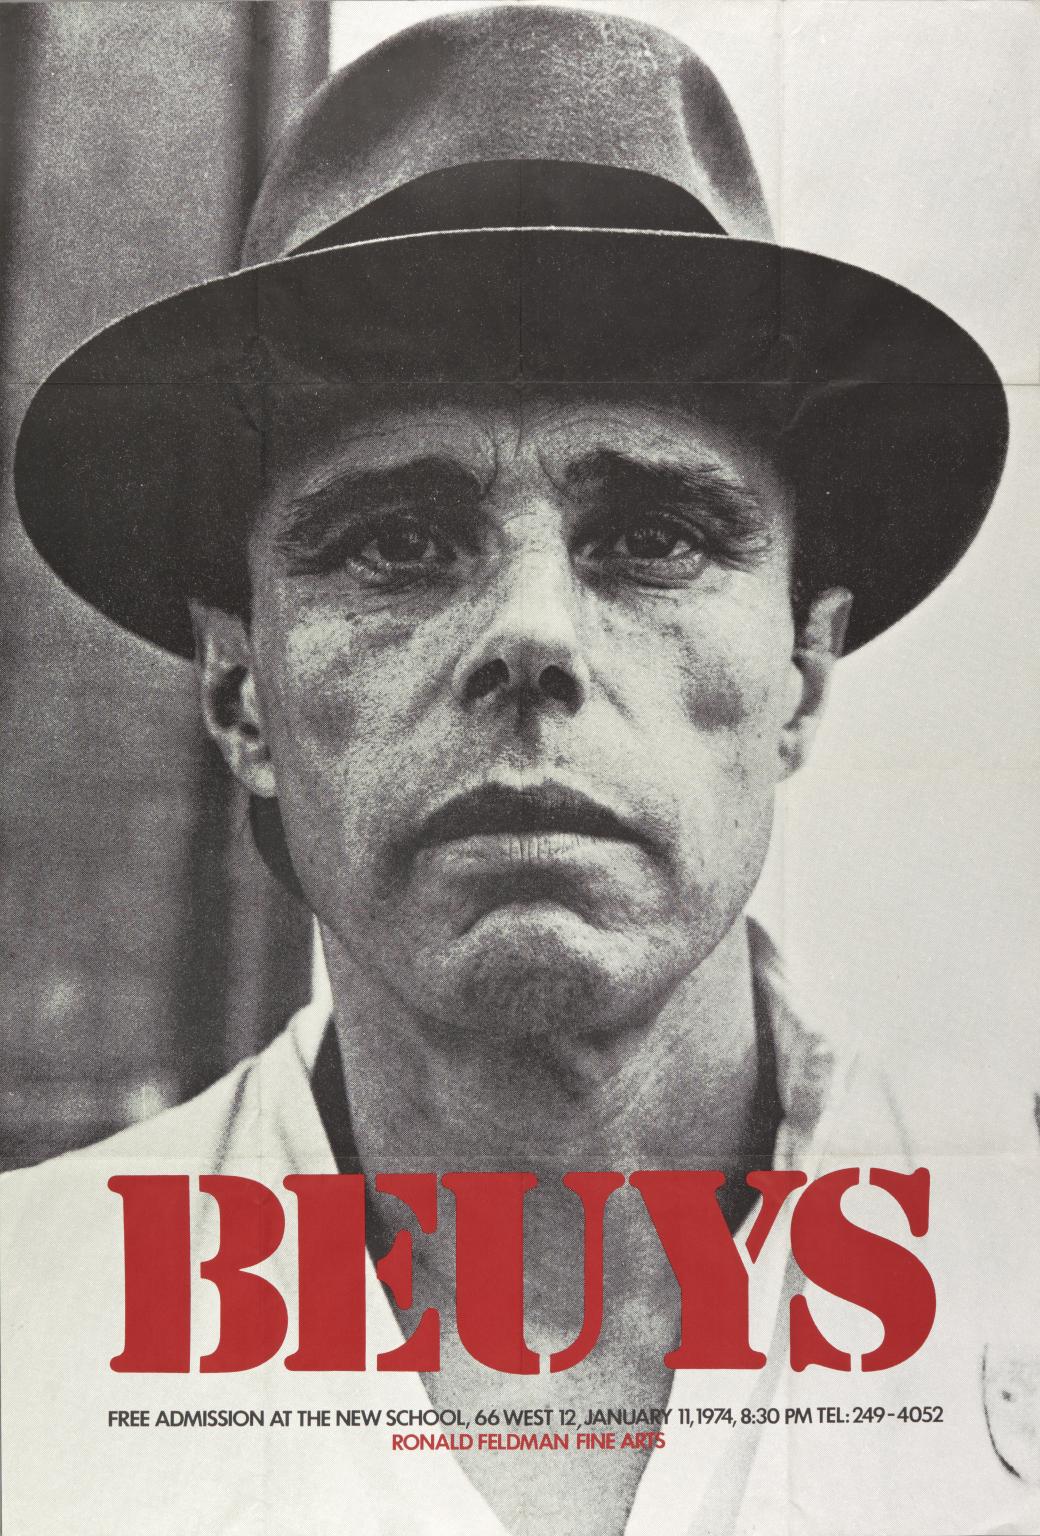 Beuys at the New School. 1974